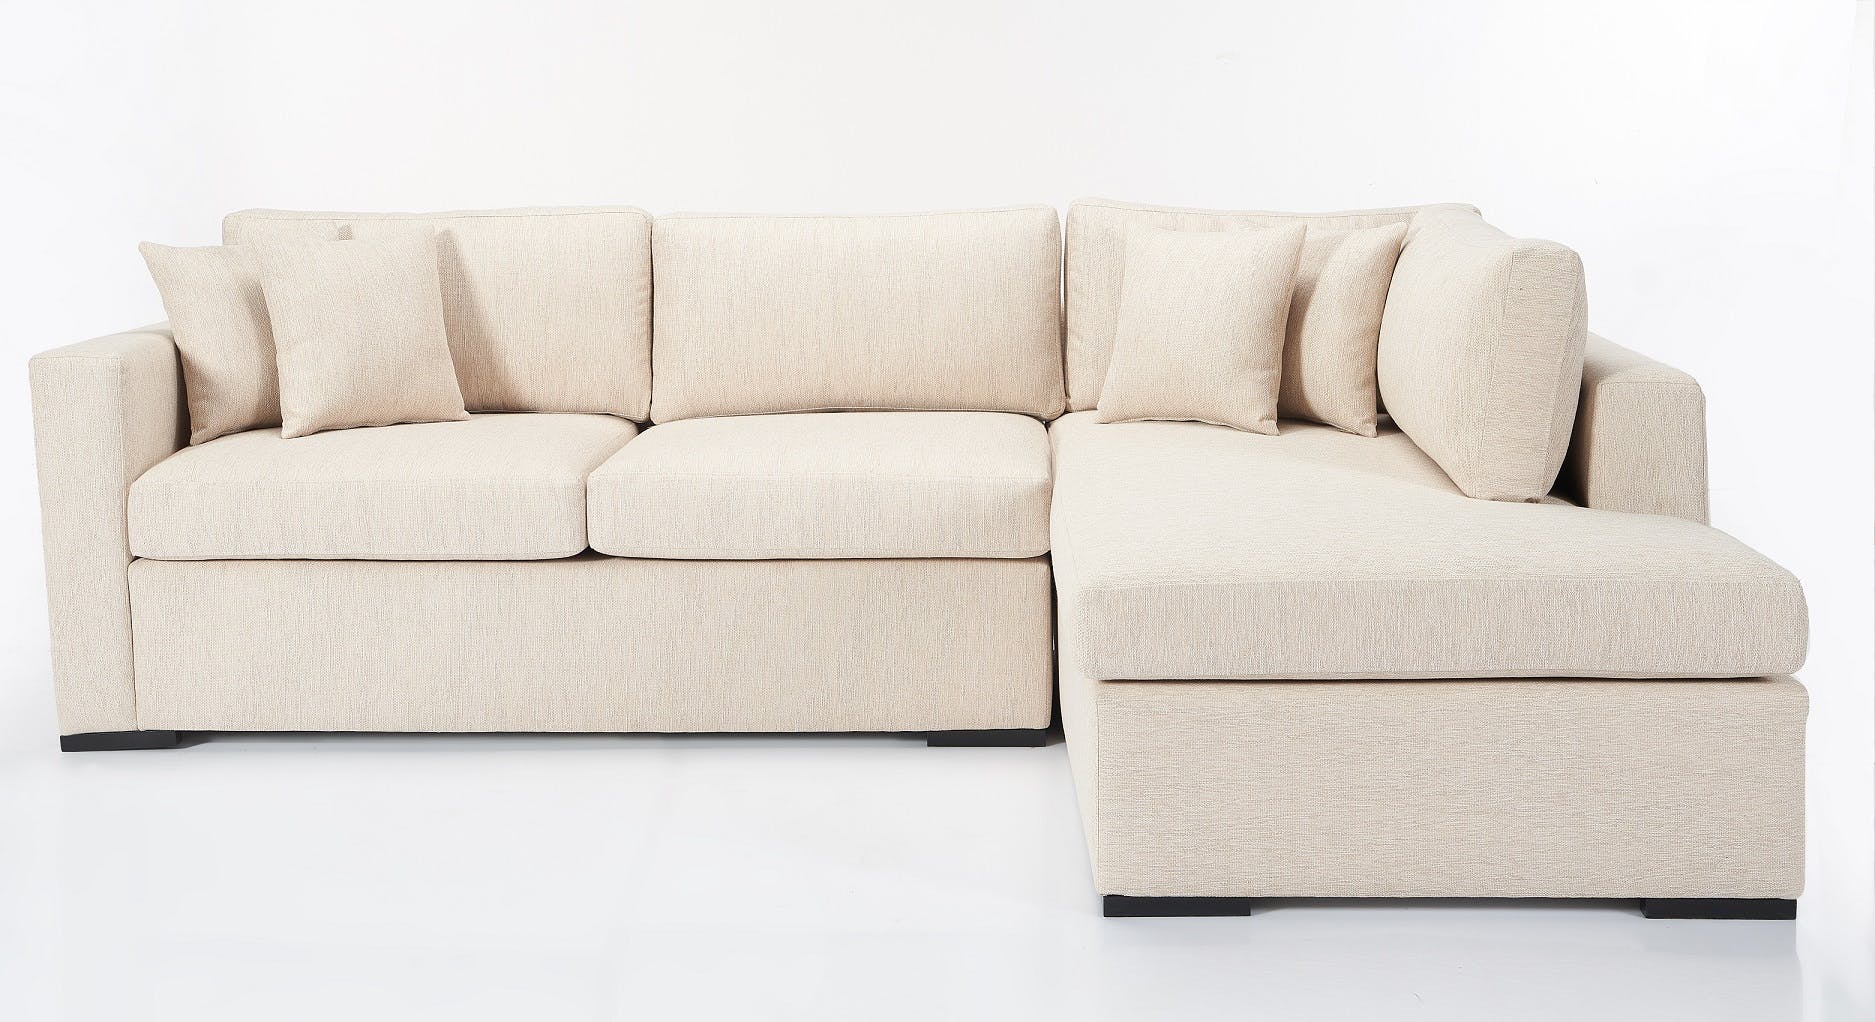 L-shaped couch 1